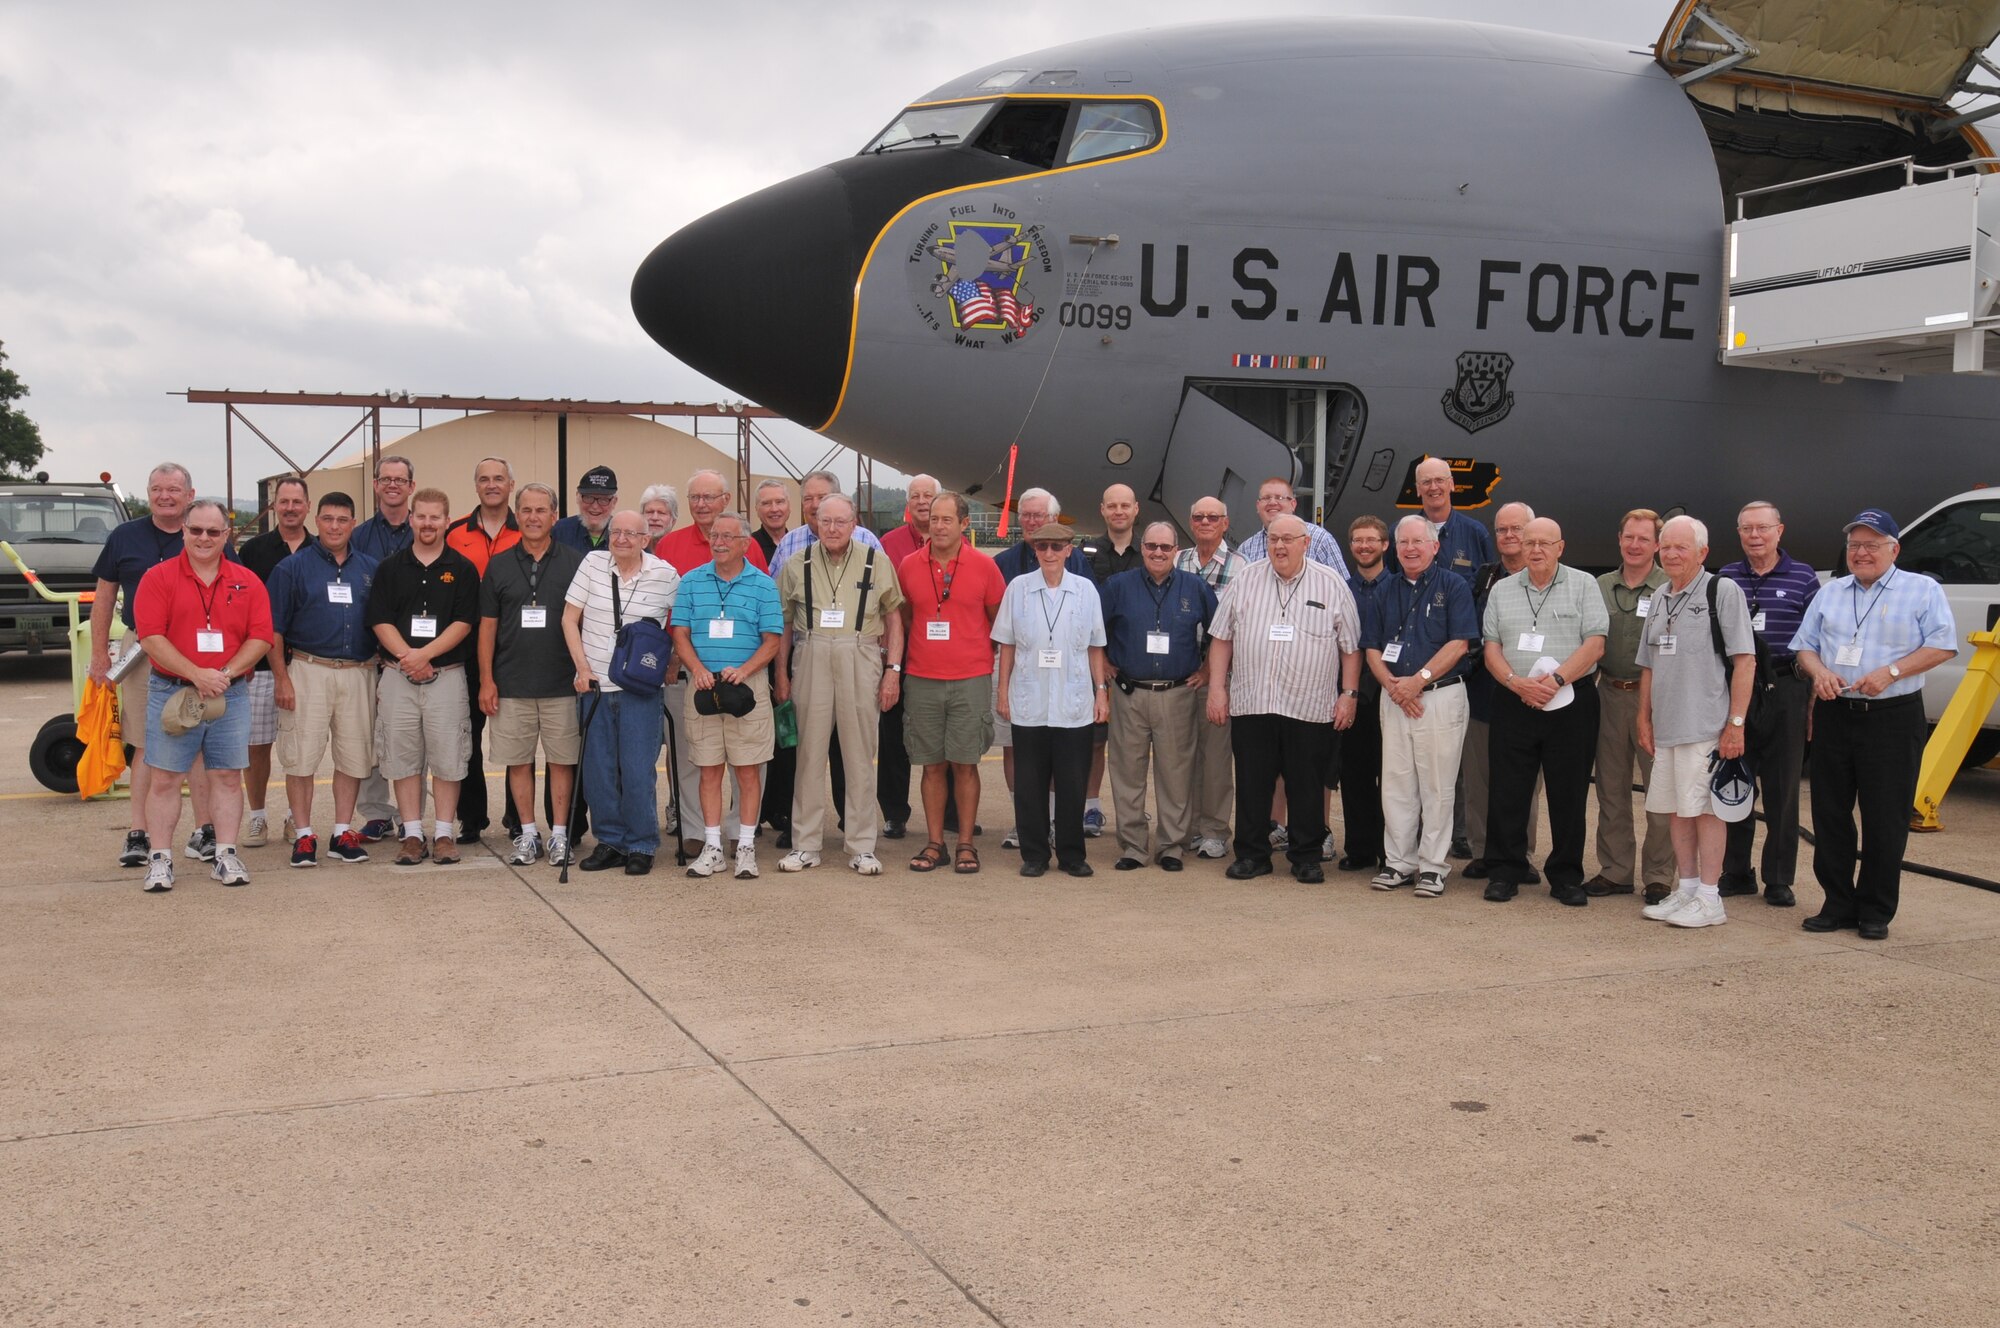 National Association of Priest Pilots tour the 171st Air Refueling Wing near Pittsburgh July 13, 2016 (U.S. Air National Guard Photo by Tech. Sgt. Michael Fariss)